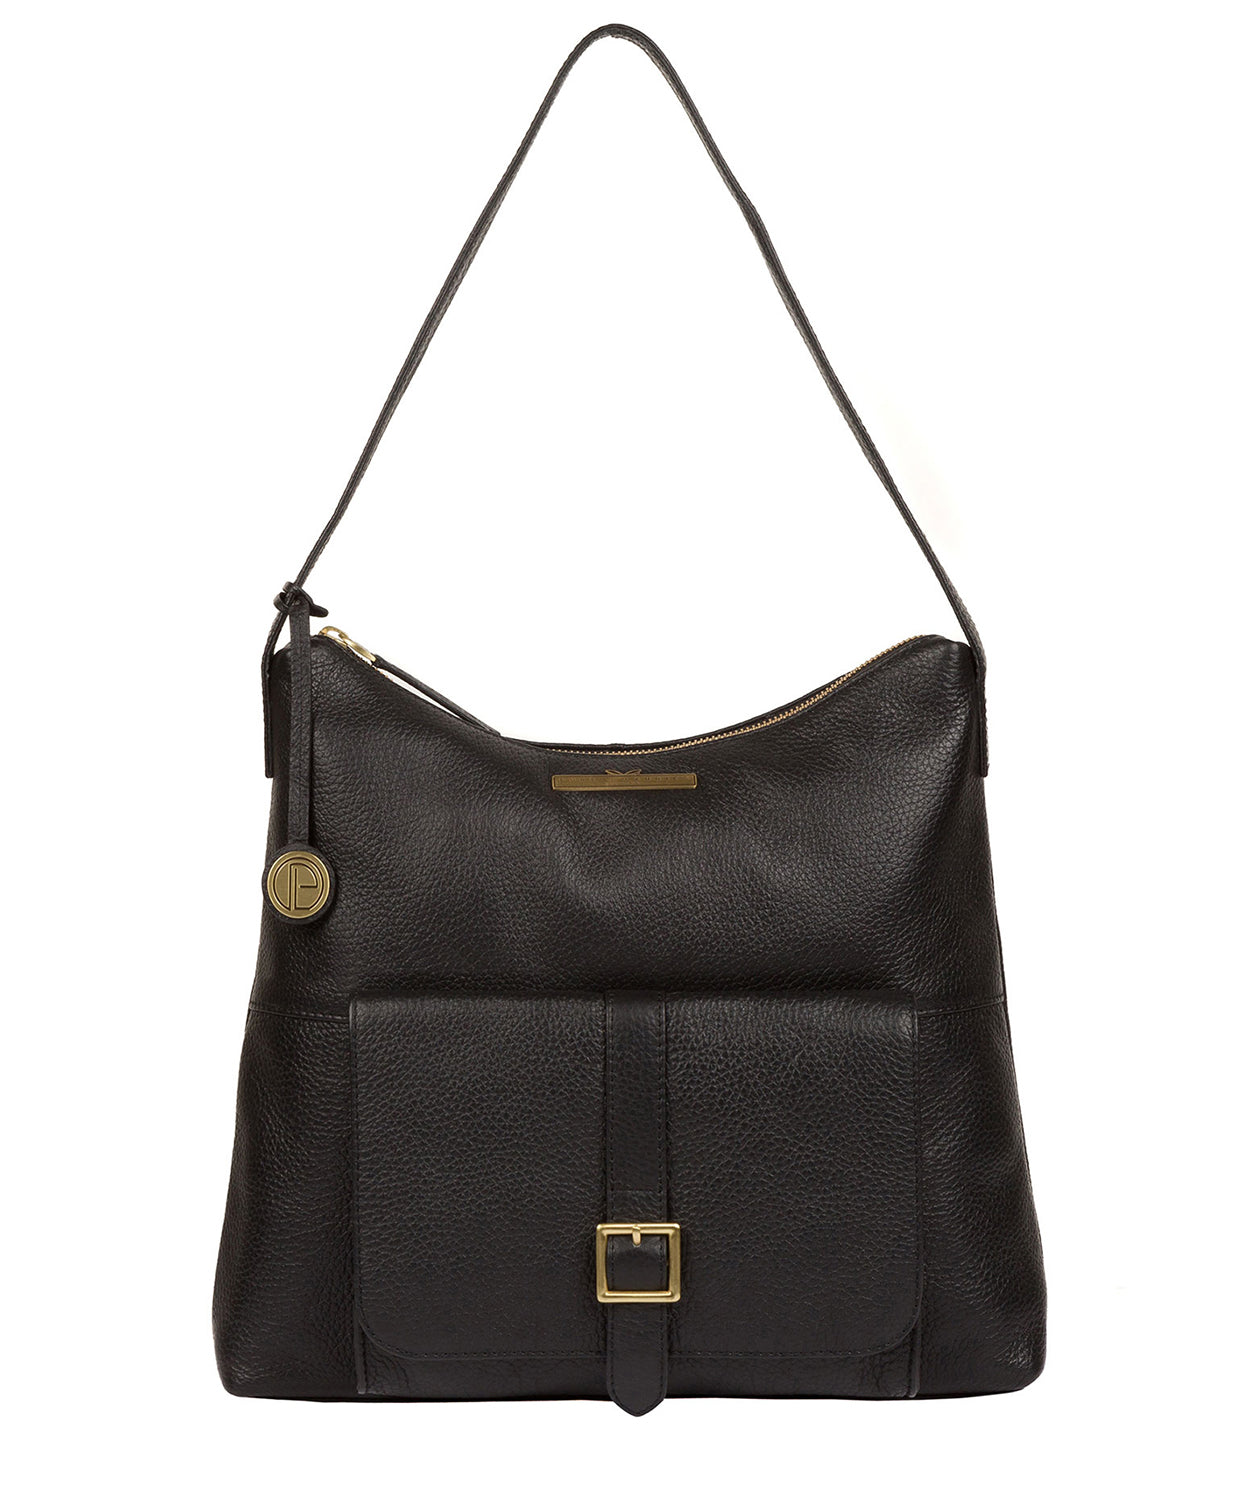 Black Leather Shoulder Bag 'Irena' by Pure Luxuries – Pure Luxuries London